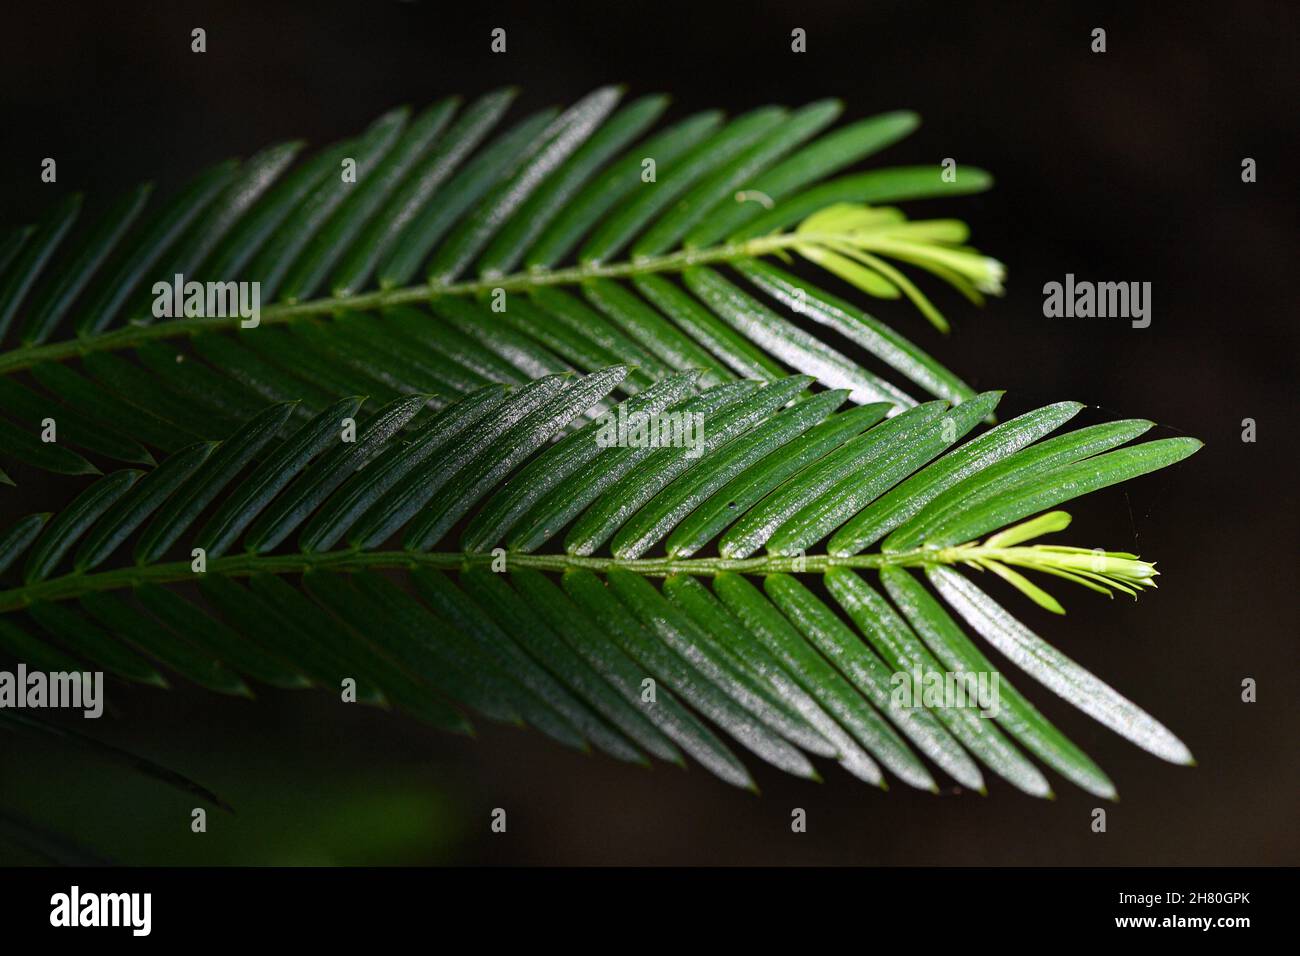 (211126) -- HAIKOU, Nov. 26, 2021 (Xinhua) -- Photo taken on May 17, 2021 shows the Cephalotaxus hainanensis in Hainan Tropical Botanical Garden in Danzhou City, south China's Hainan Province. Hainan Tropical Botanical Garden, located in Danzhou of south China's Hainan, was founded in 1958 and is now affiliated with Chinese Academy of Tropical Agricultural Sciences. The garden, with over 2,600 kinds of tropical and subtropical plants collected from more than 40 countries and regions, is a treasure house of tropical plant resources including flowers, fruit trees, medicinal plants and economic p Stock Photo